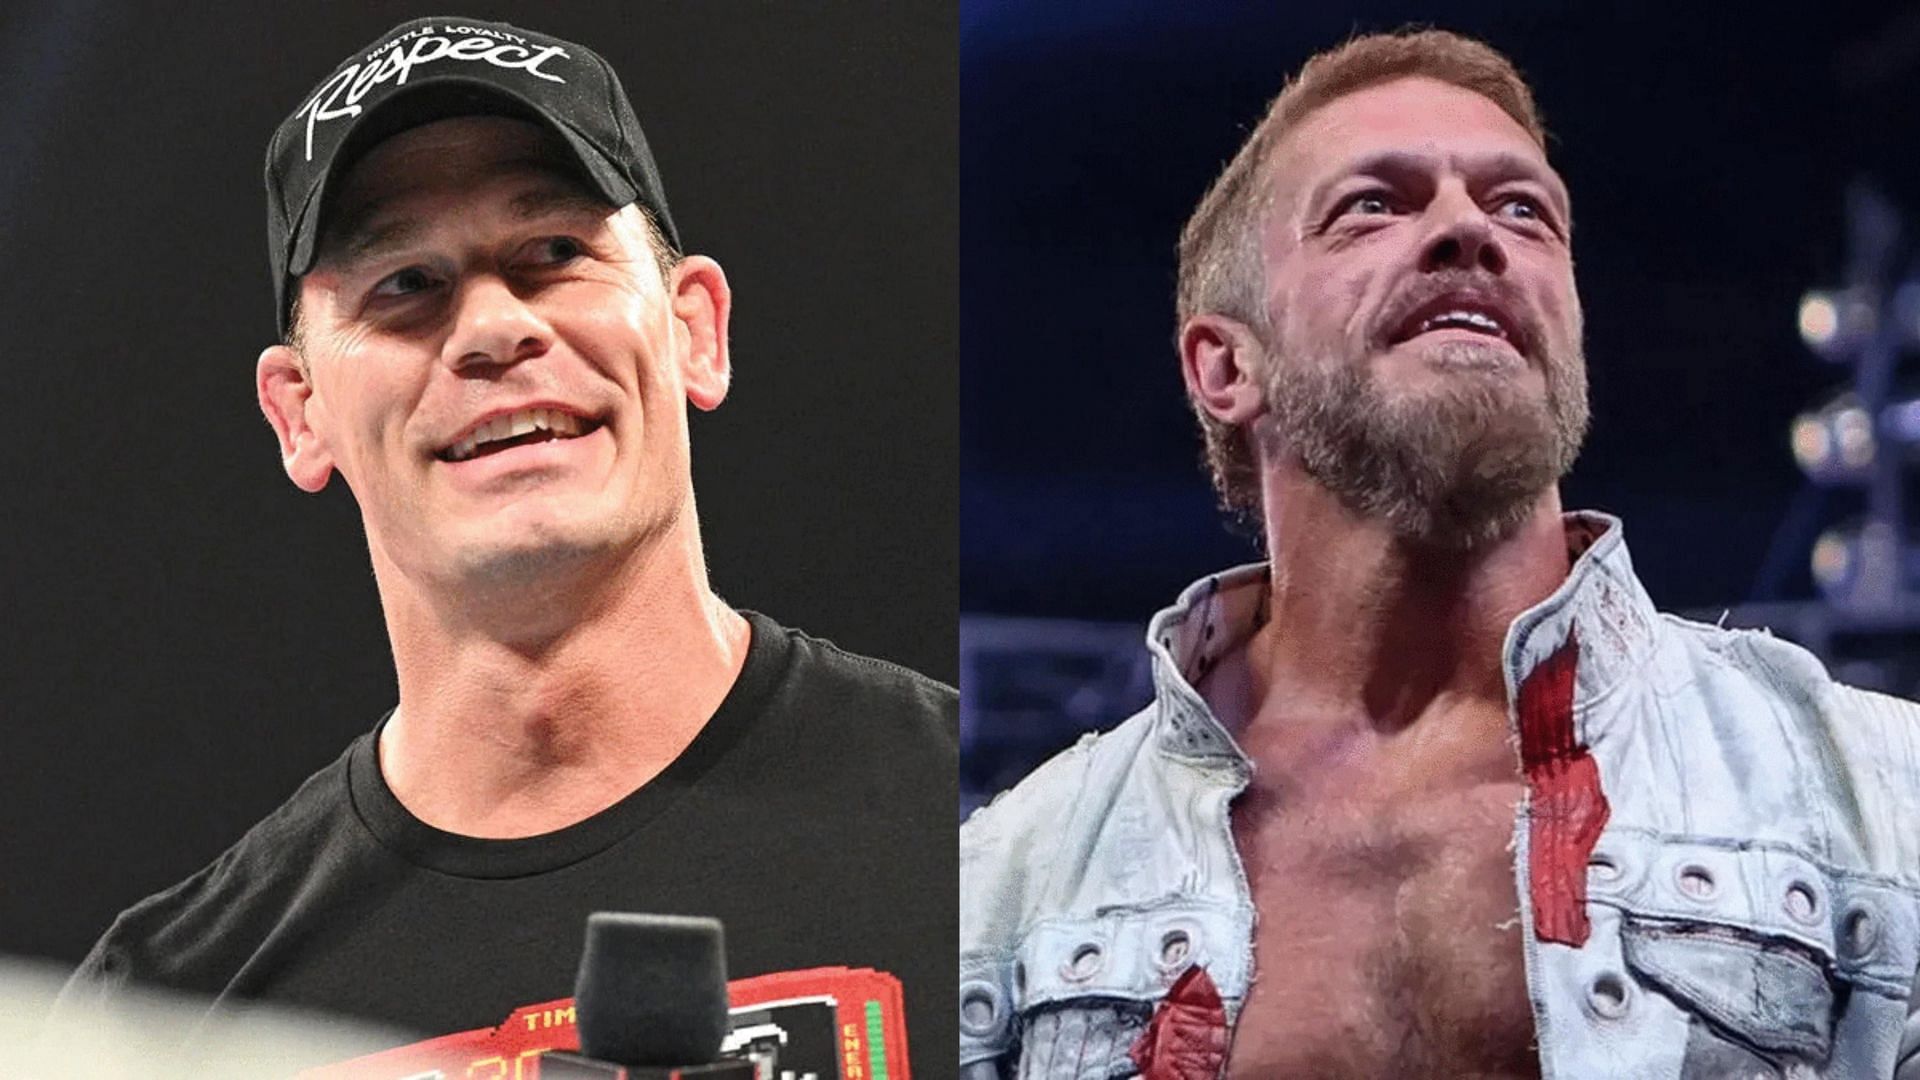 John Cena and Edge have won a combined 27 World Championships